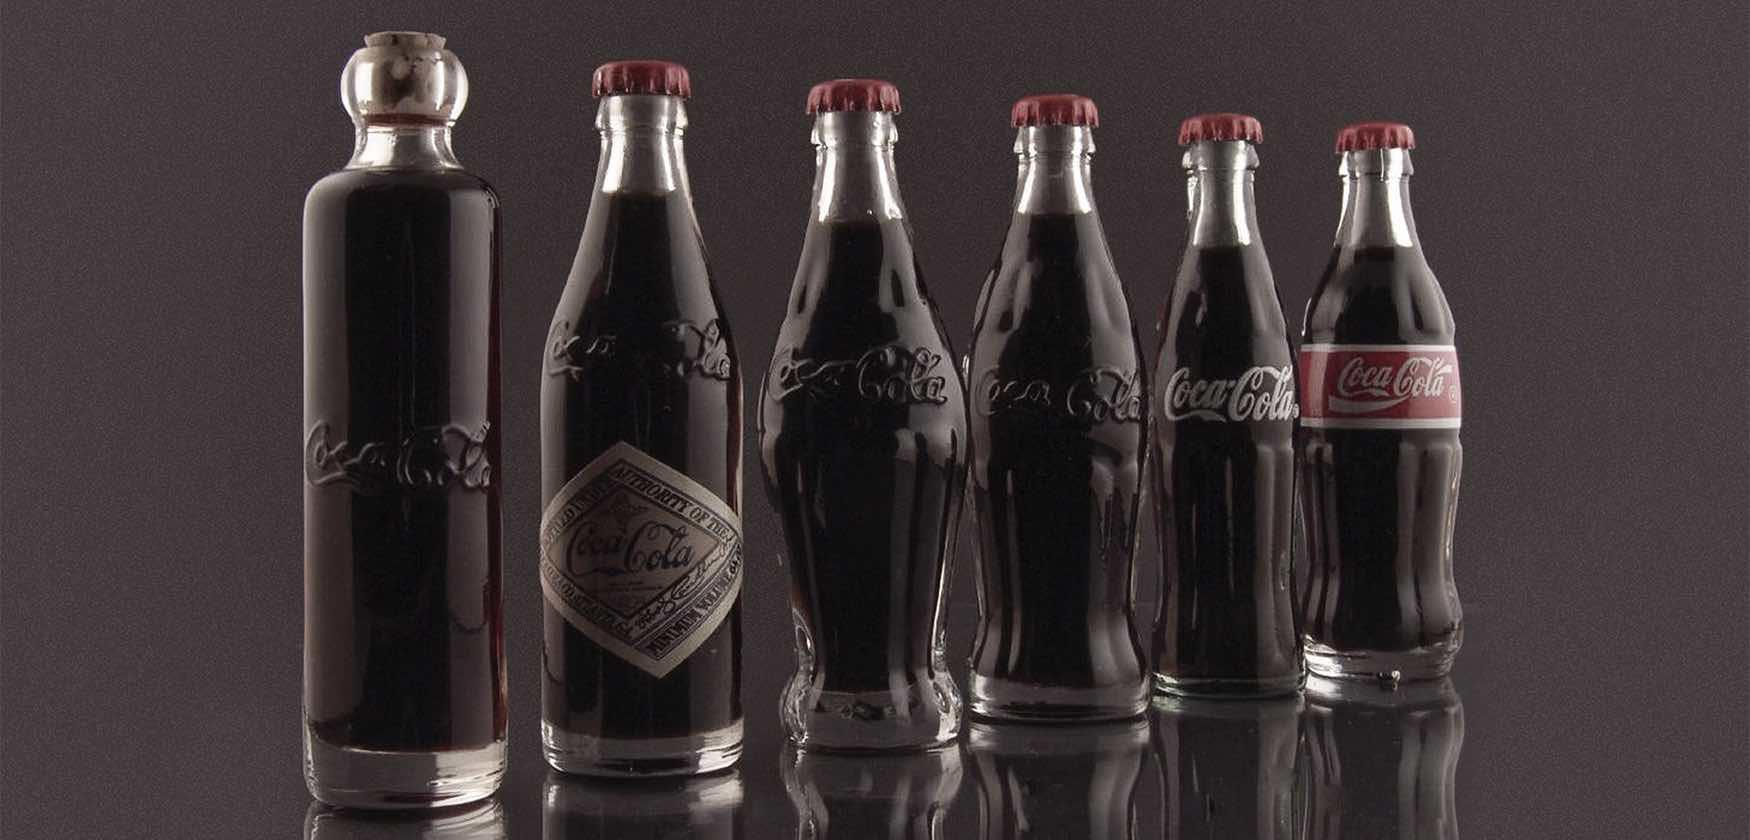 Coca-Cola was widely copied in 1915. After that, it created a bottle that was protected by a patent and couldn’t be duplicated.